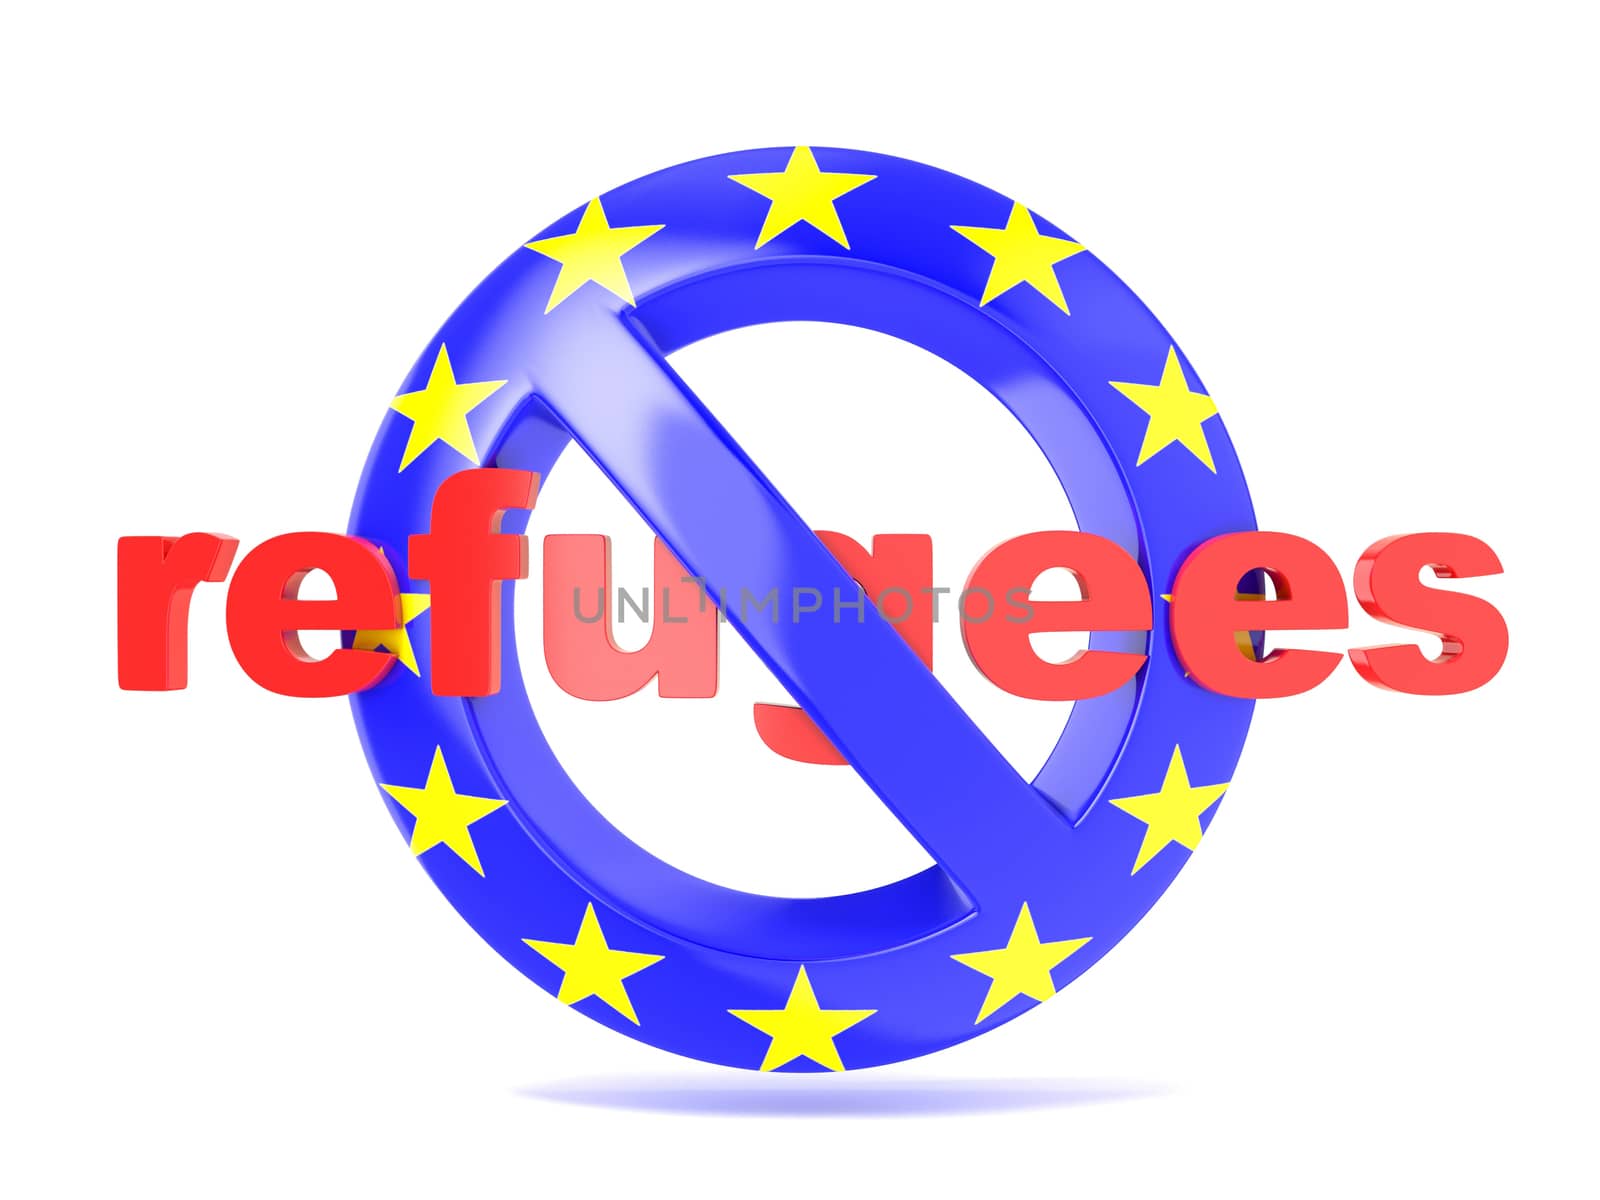 Forbidden sign with EU flag and refugees. Refugees crisis concept. 3D render illustration isolated on a white background